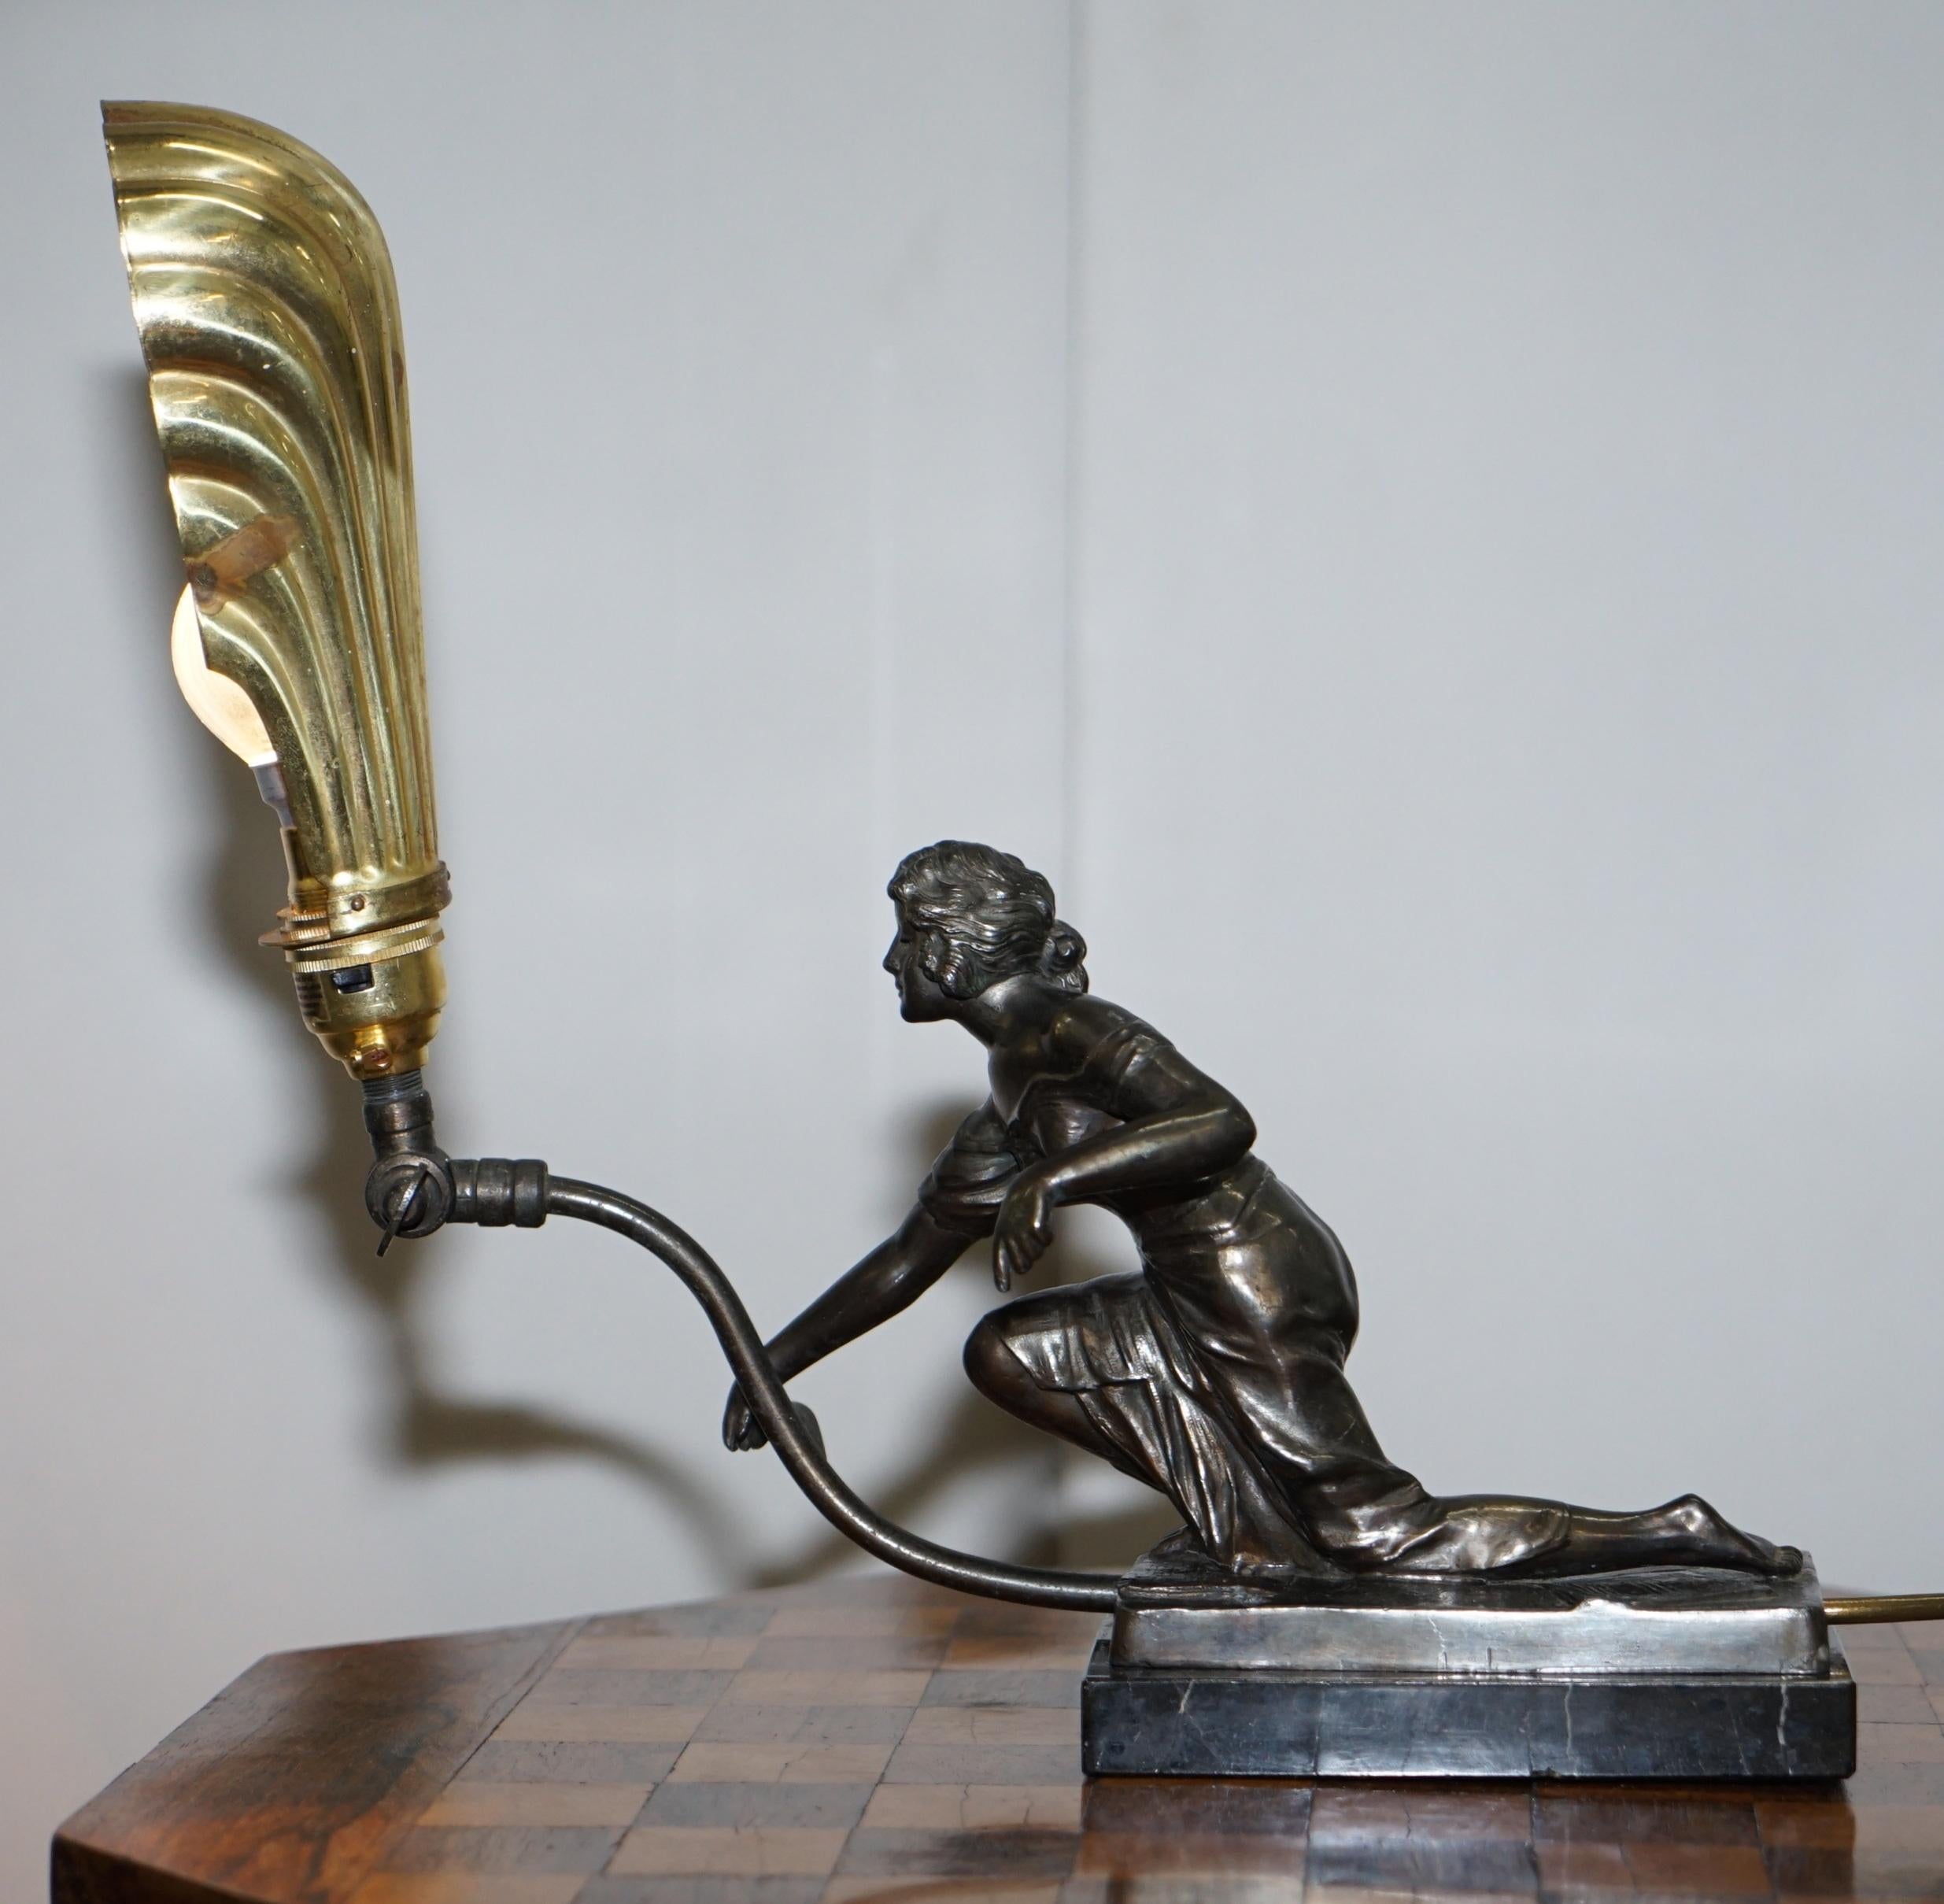 We are delighted to offer for sale this lovely original Art Deco table lamp with marble base, bronze statue and gold gilt bronze shell shade

A good looking well made a decorative lamp, it has an articulated and adjustable shade so you can have